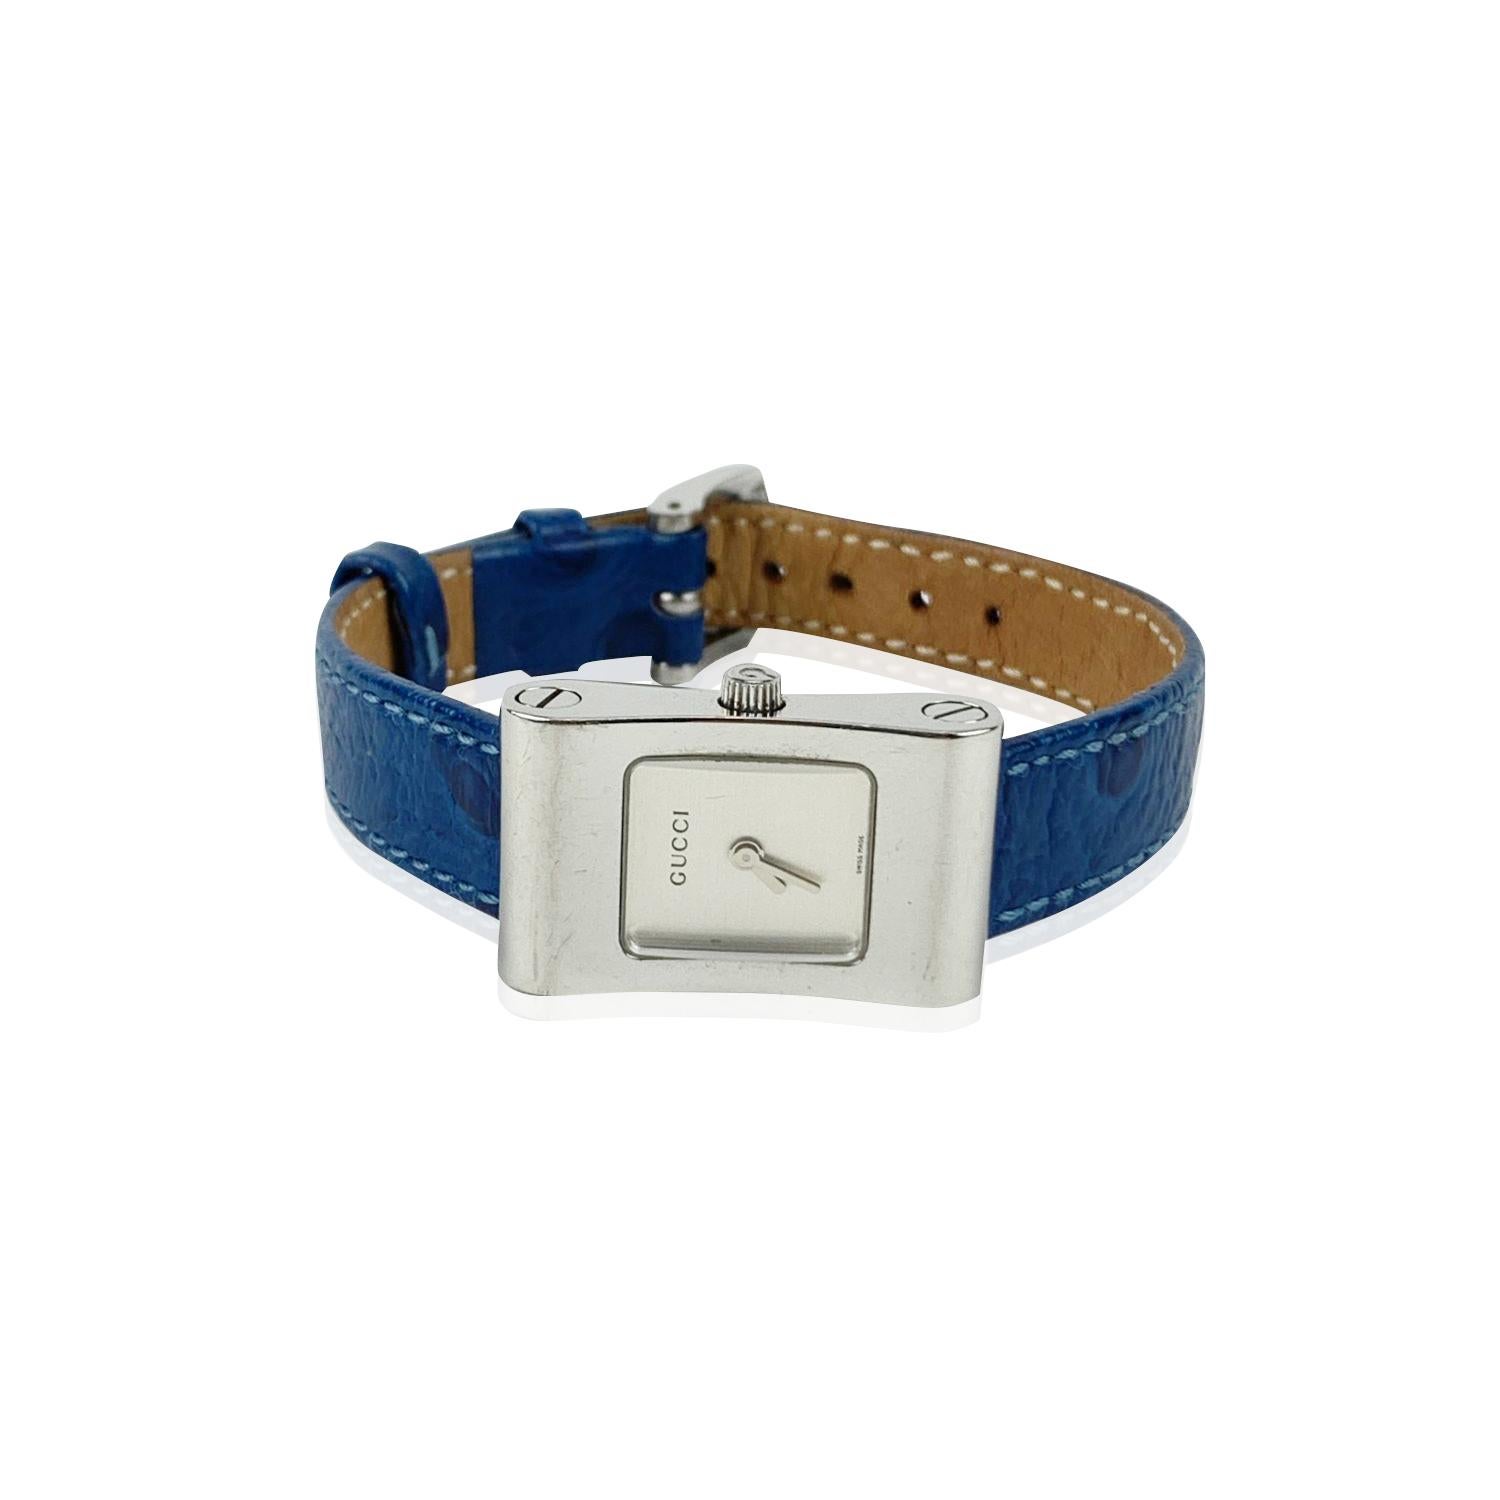 Beautiful vintage wristwatch by GUCCI, Mod. 2300 L. Rectangular silver tone stainless steel case. Swiss Made Quartz Movement. Blue leather wrist strap with 7 holes adjustment. White dial. 'GUCCI' lettering on the dial. Total length: 8 inches - 20.3